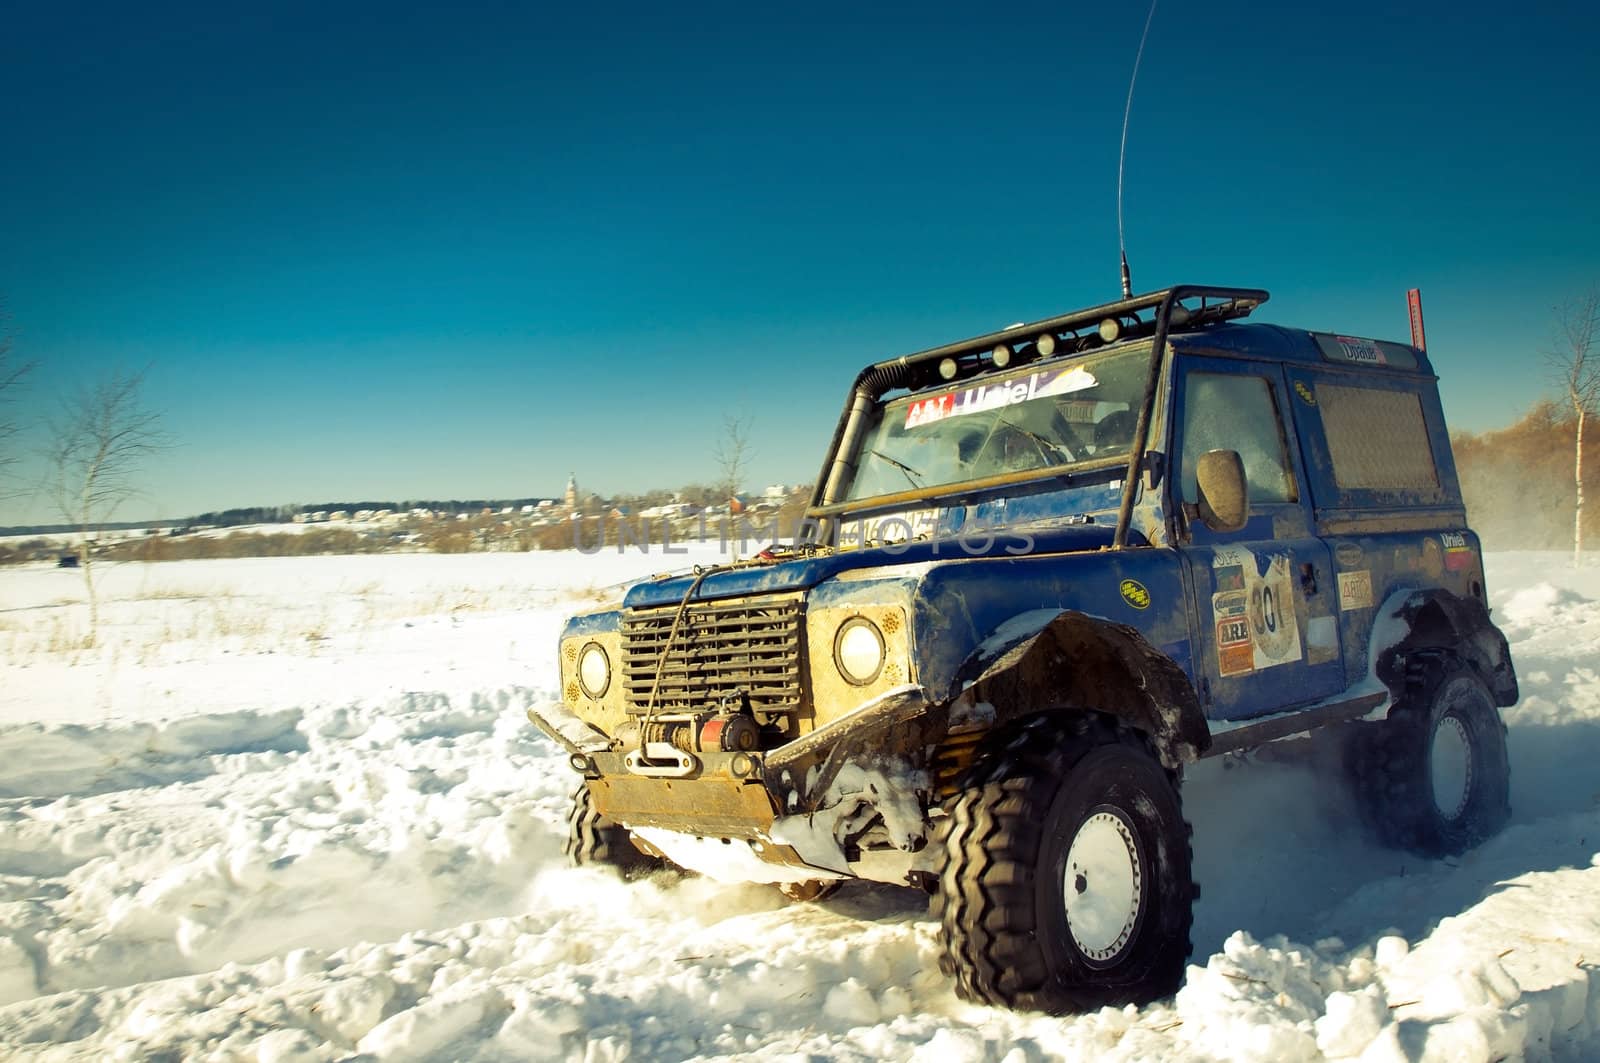 Land Rover Defender 90 suv
Car on background the Russian winter.
February 19, 2011. Mattrazz Trophy # 18